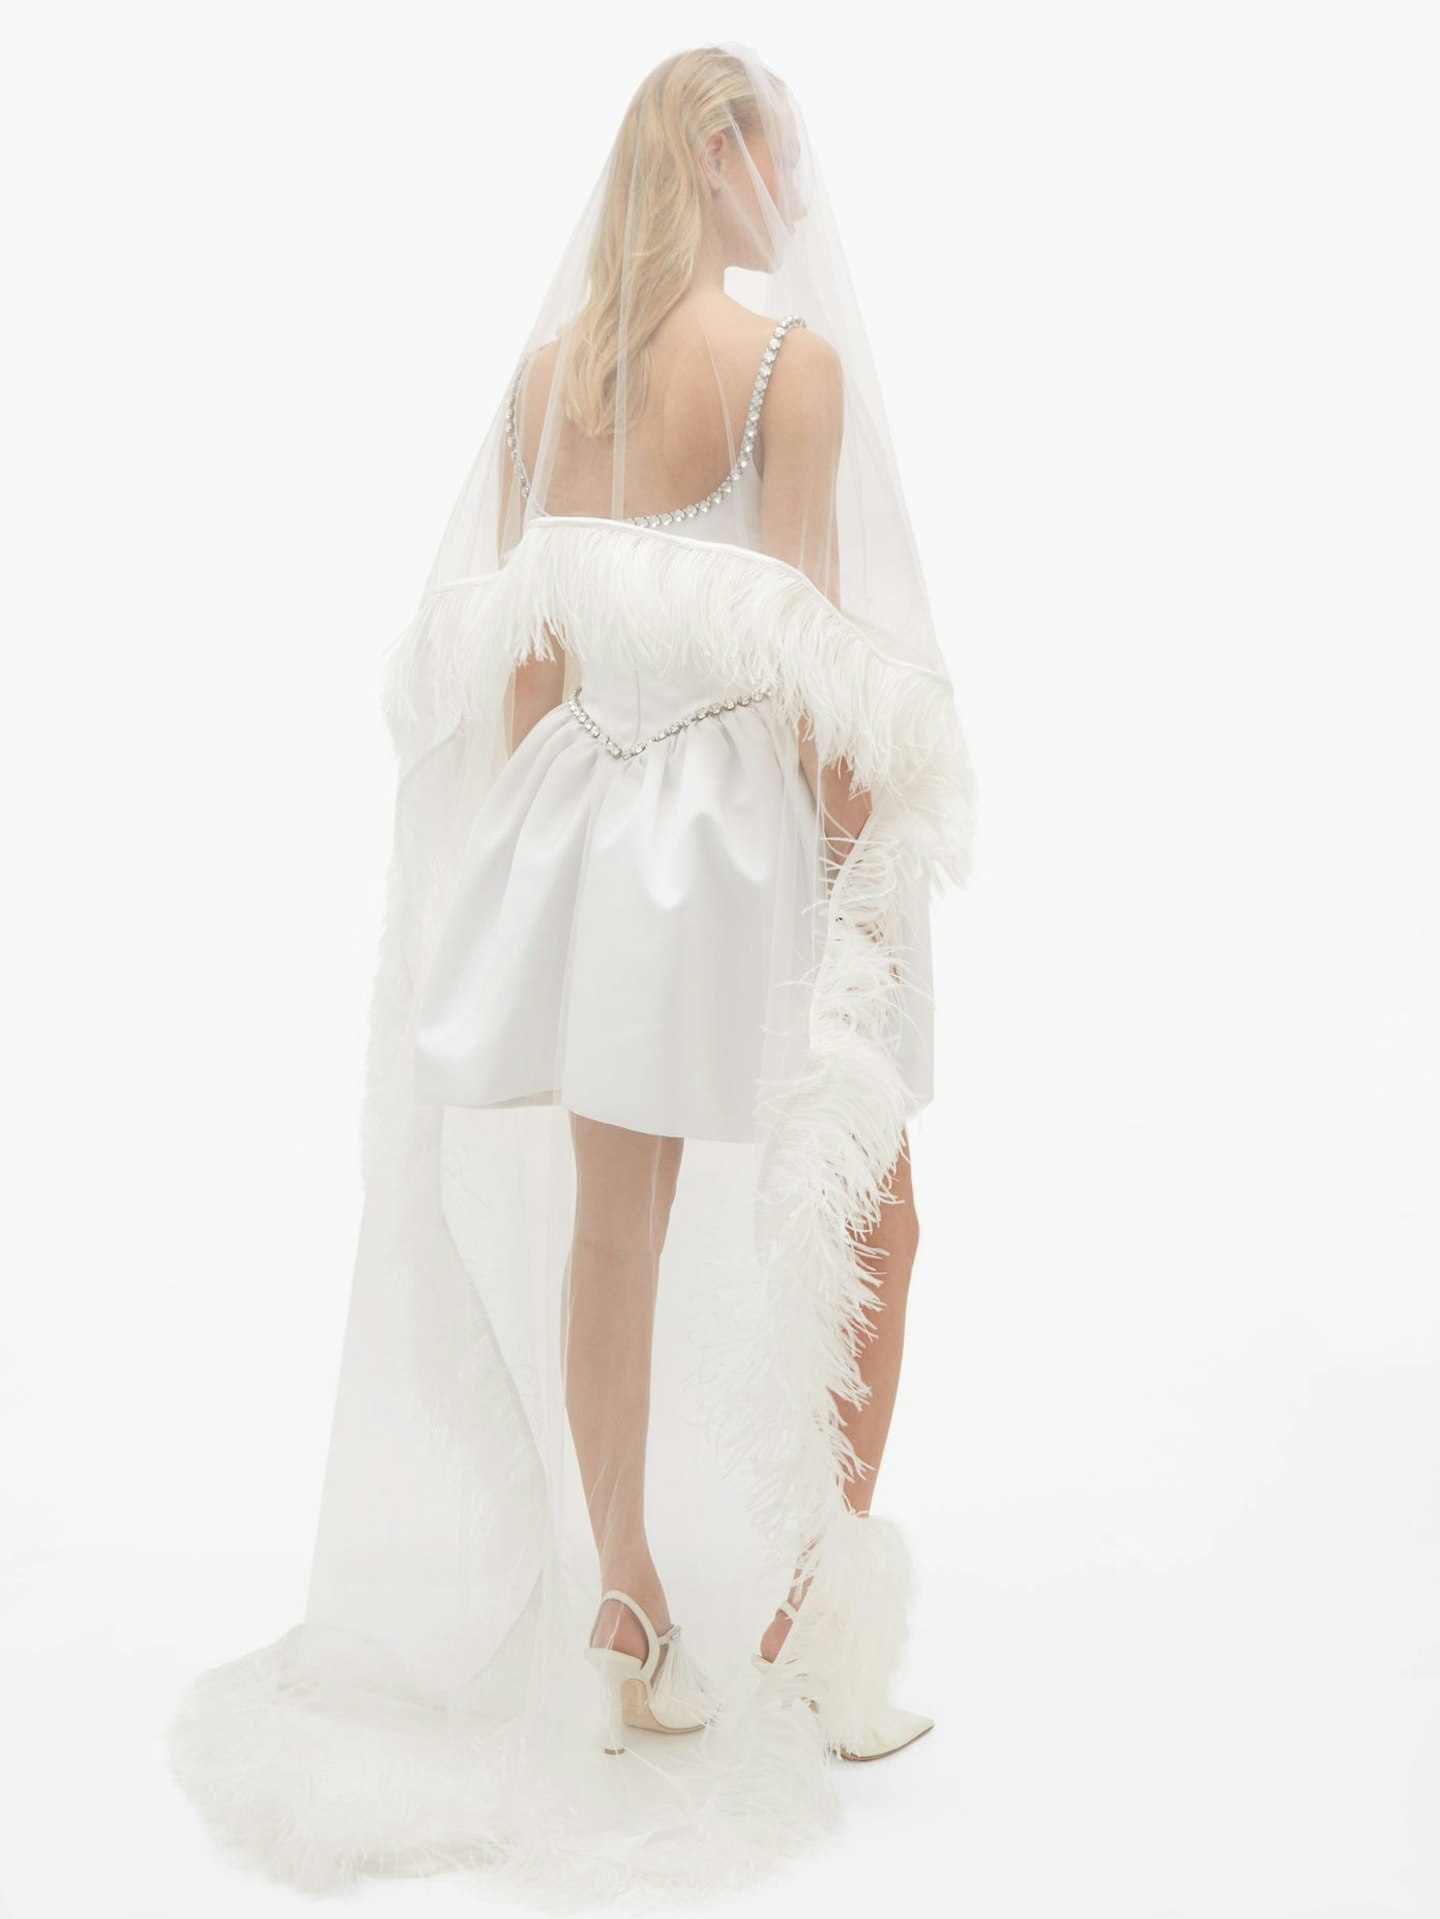 Christopher Kane, Feather-Trimmed Tulle Veil, £795